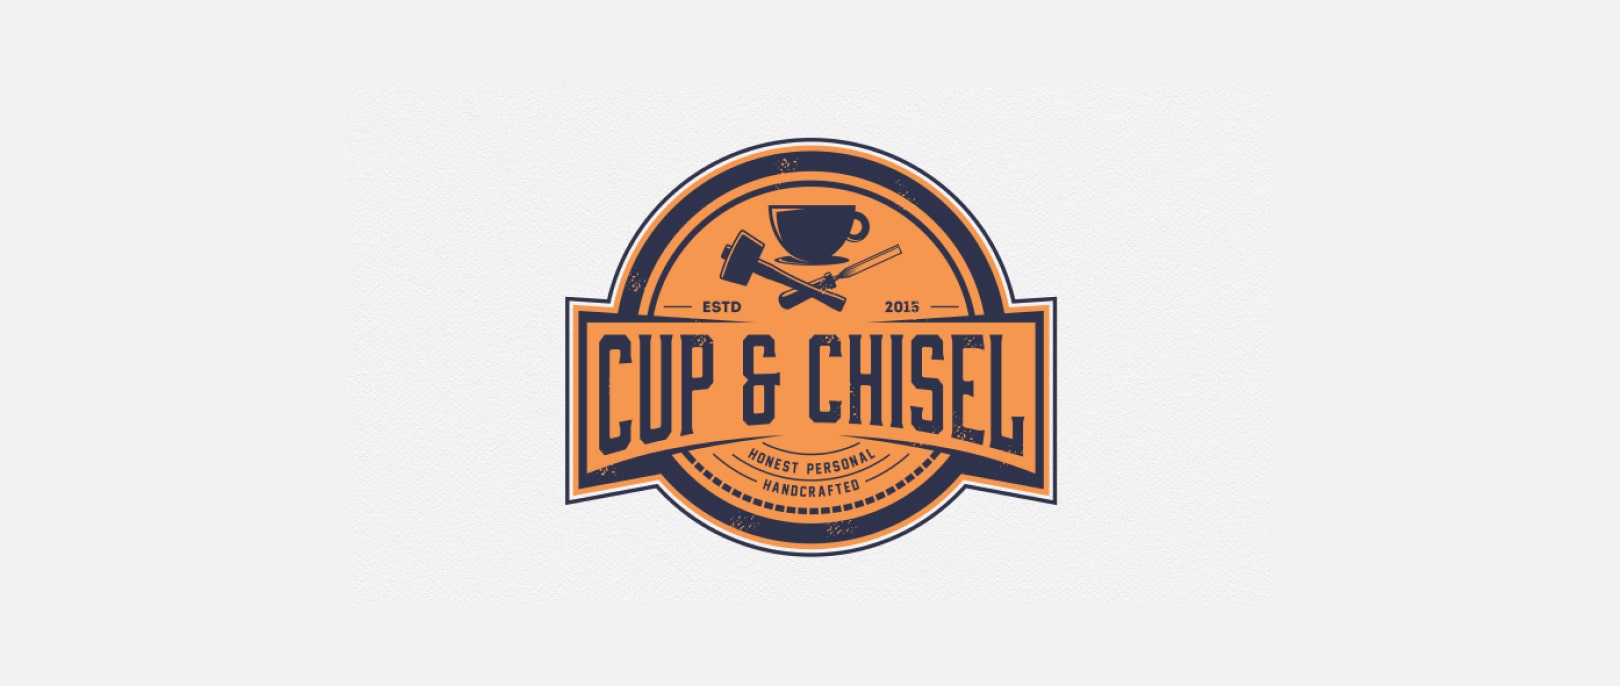 Cup and chisel